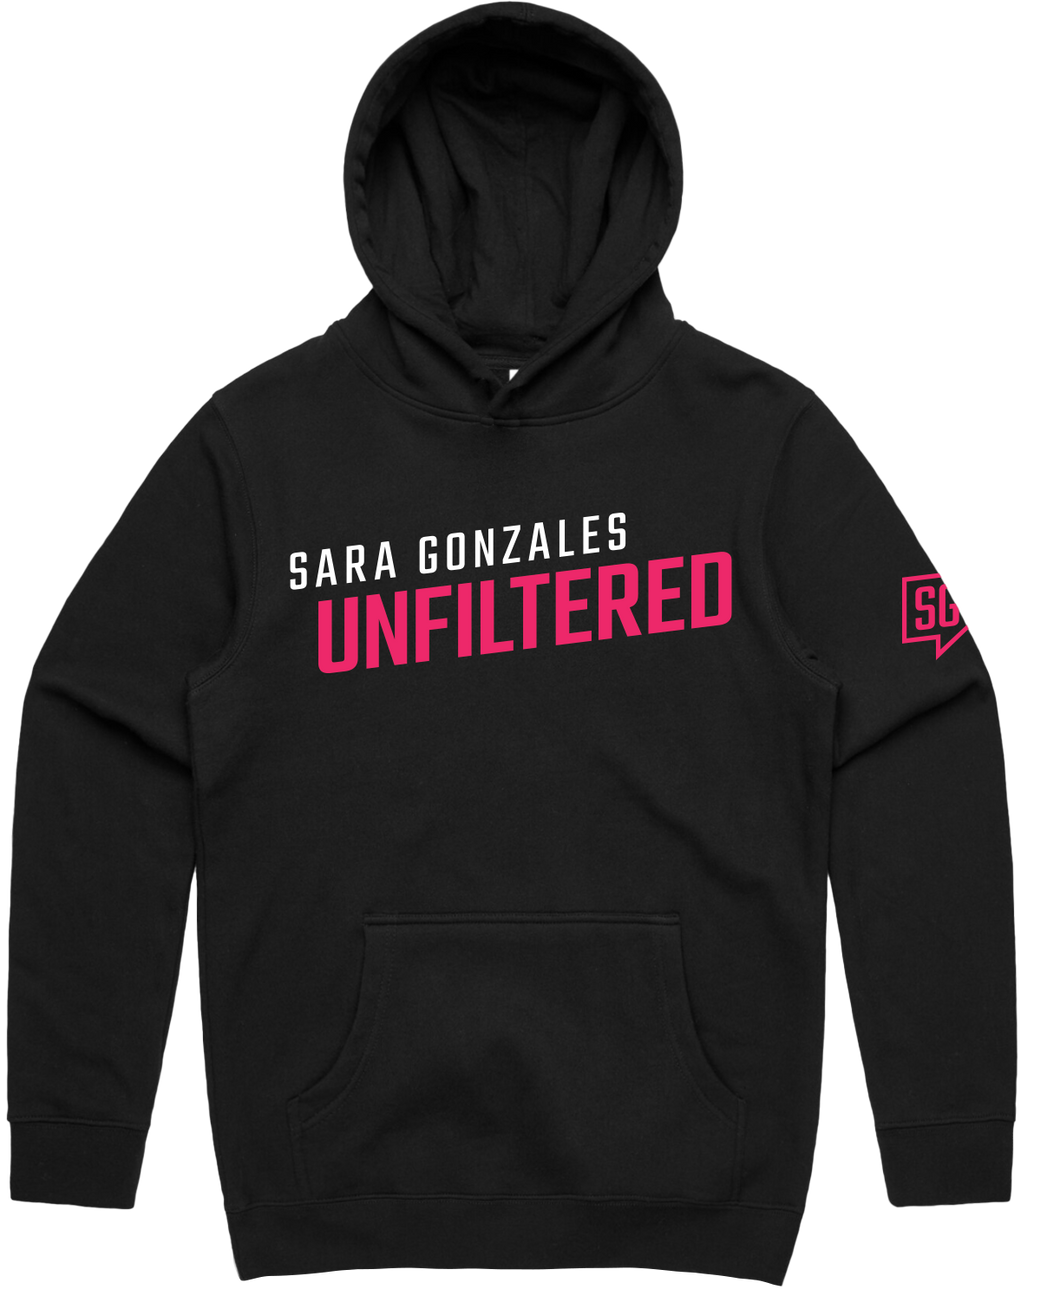 Unfiltered Show Hoodie - Black